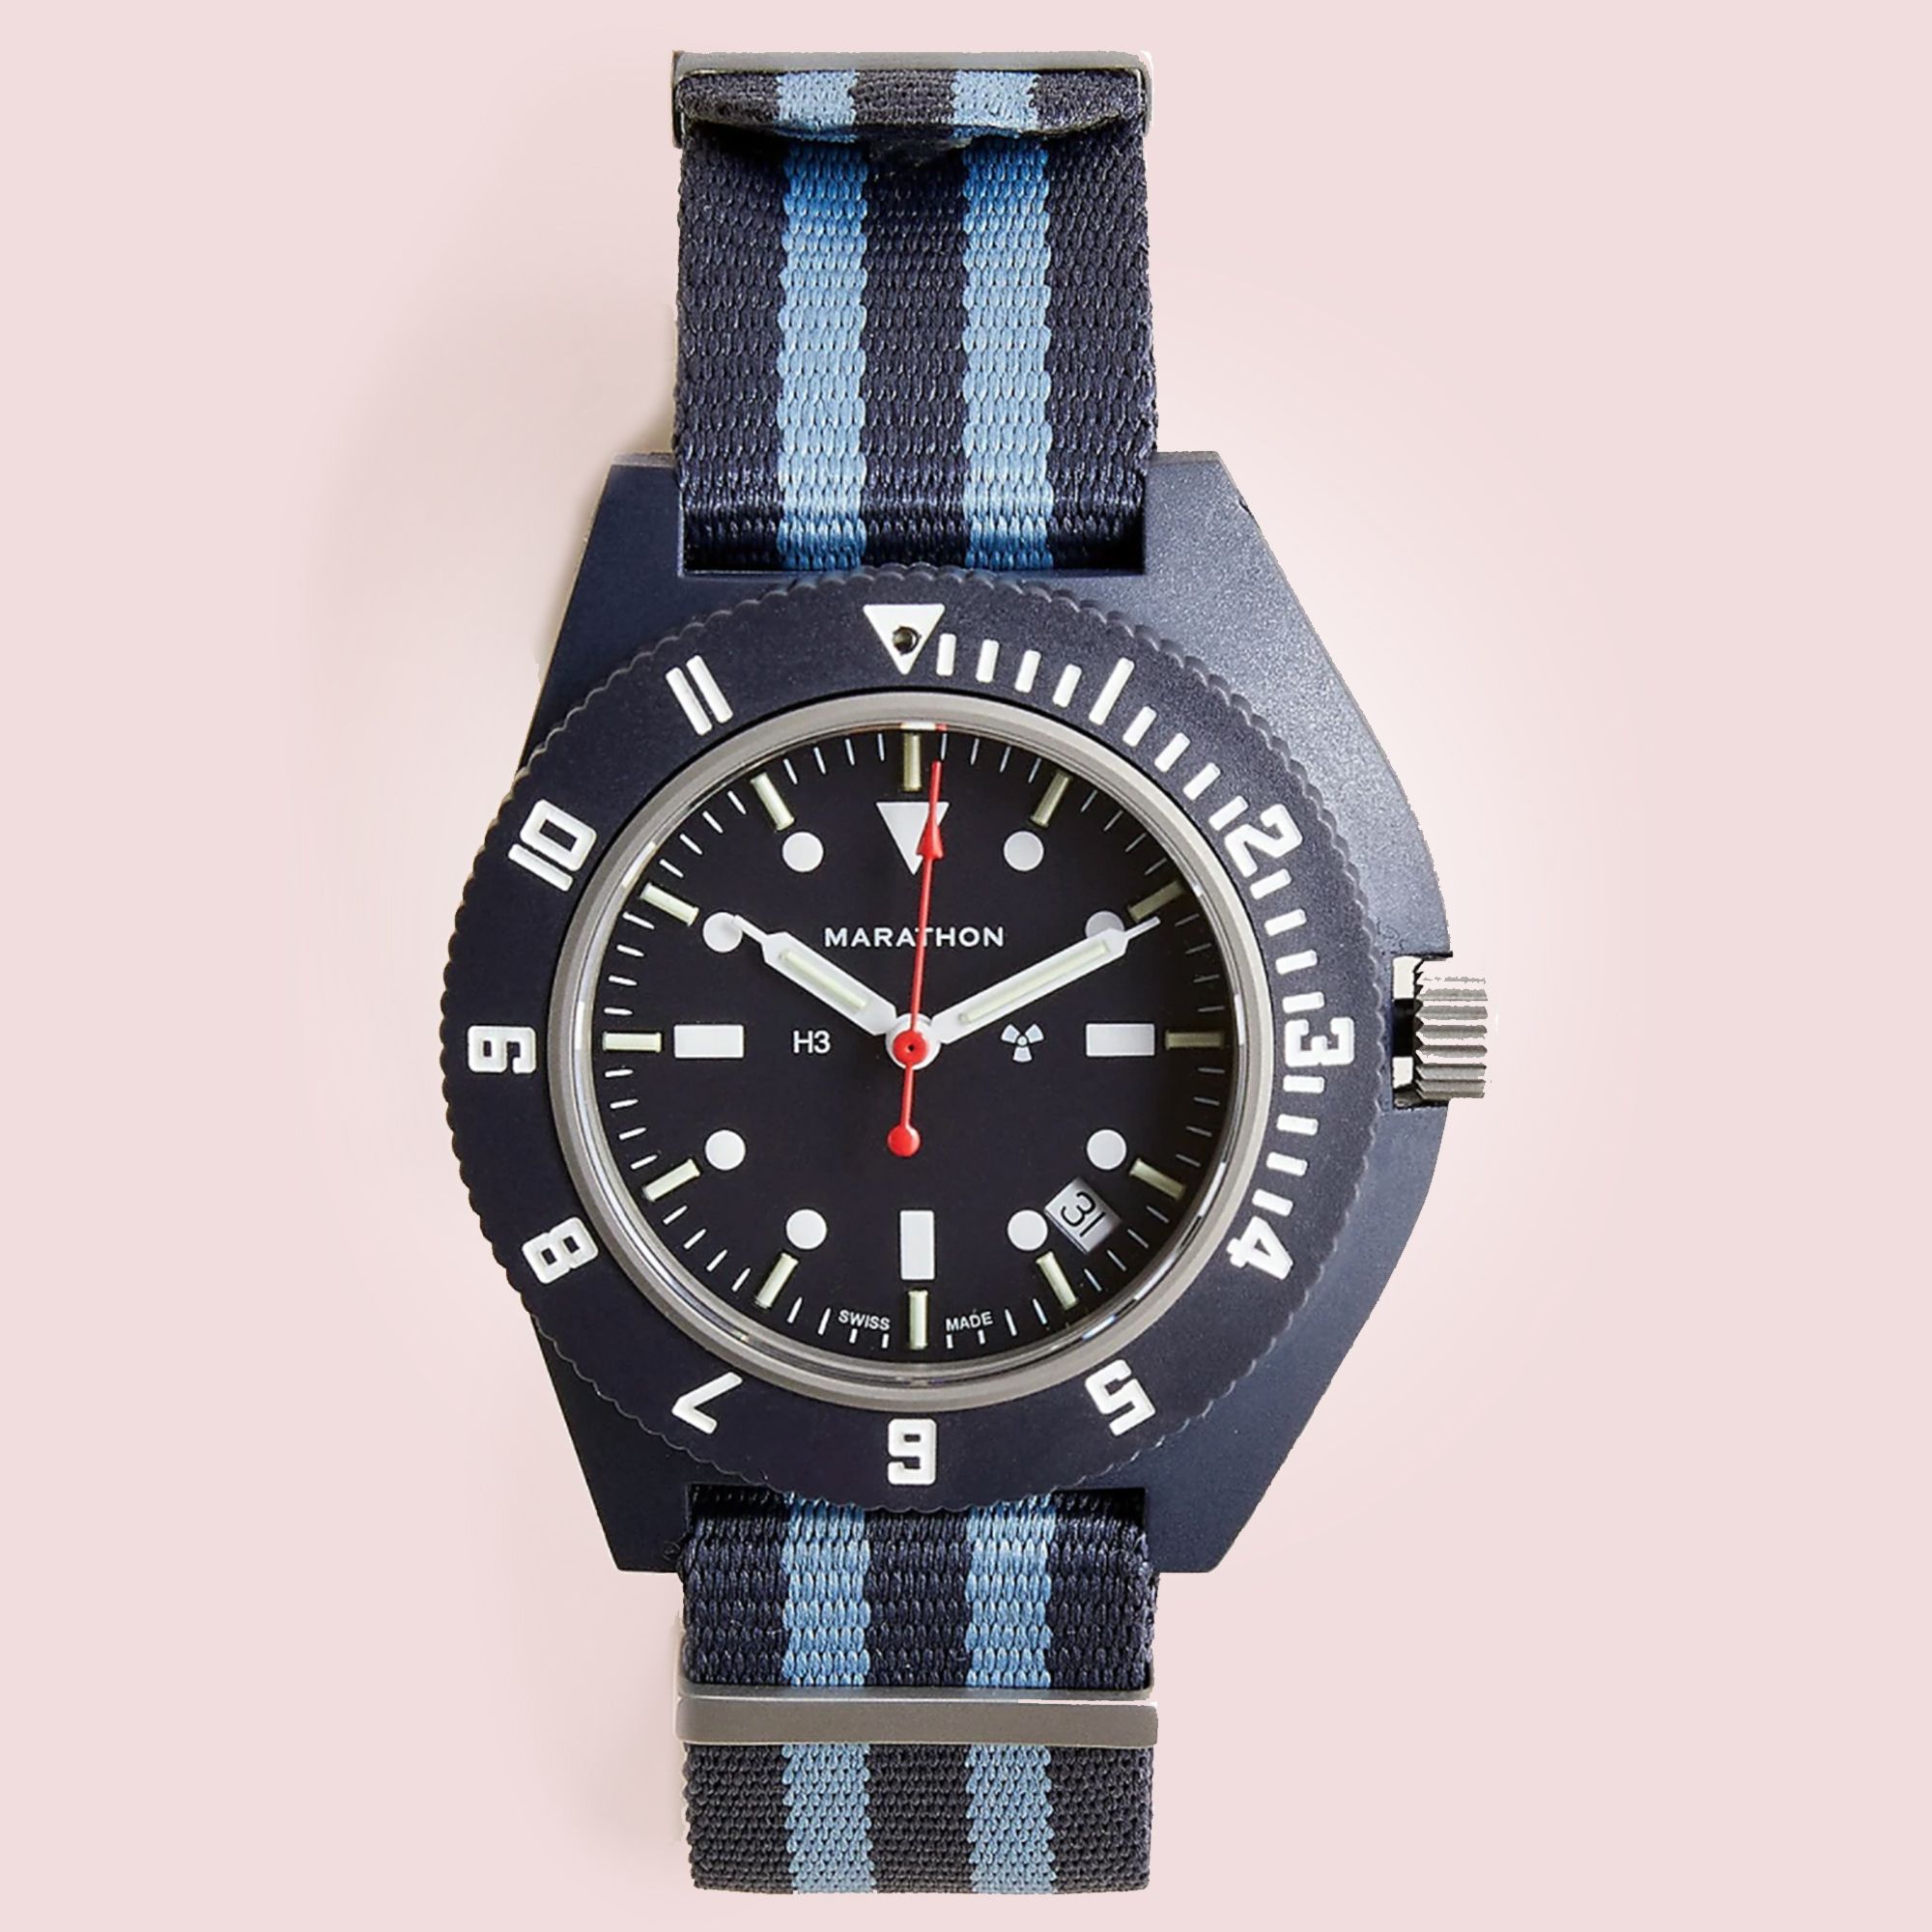 J.Crew and Marathon's Swiss-Made, Mil-Spec Watch Is a Damn Steal—and Damn Good-Looking